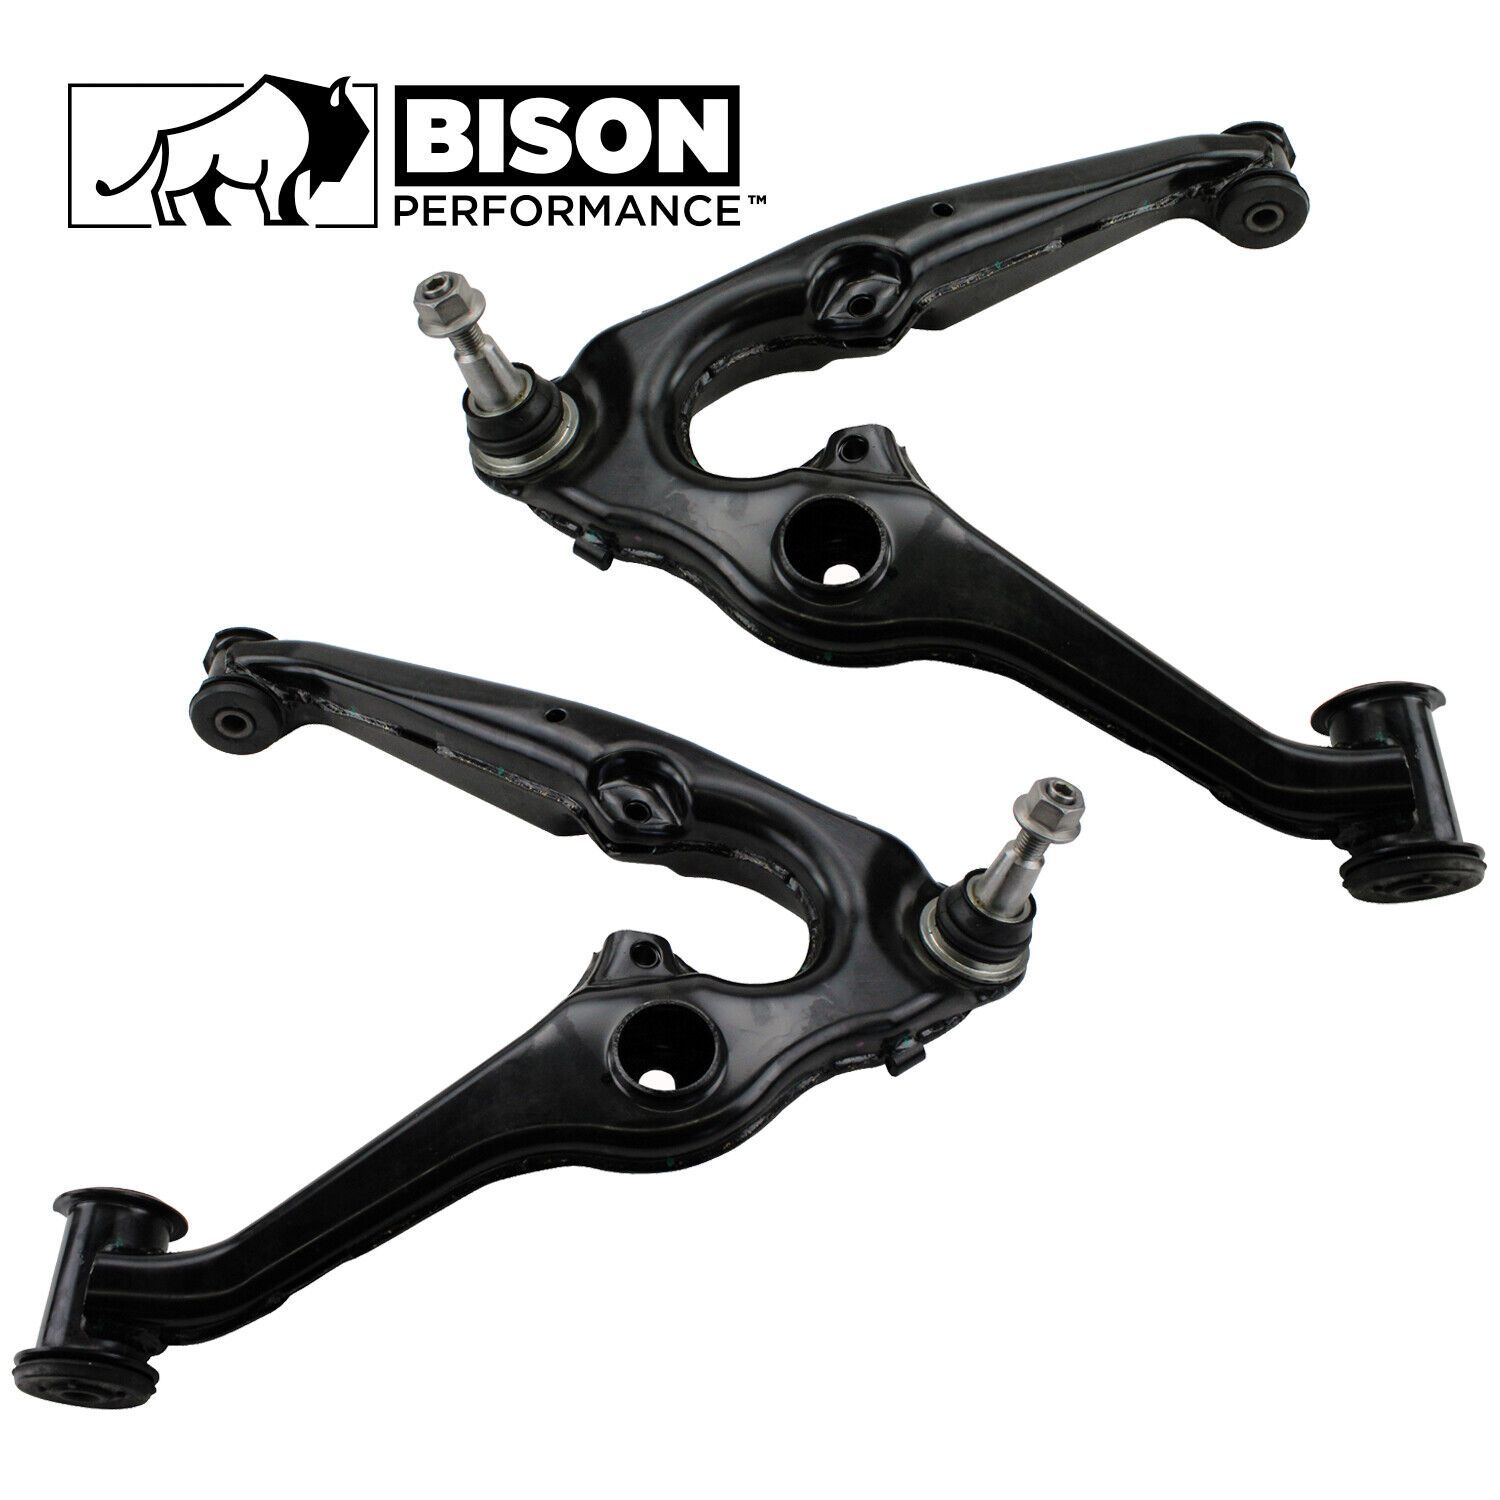 Bison Performance 2pcs Front Lower Control Arm Assemblies For Cadillac Chevy GMC